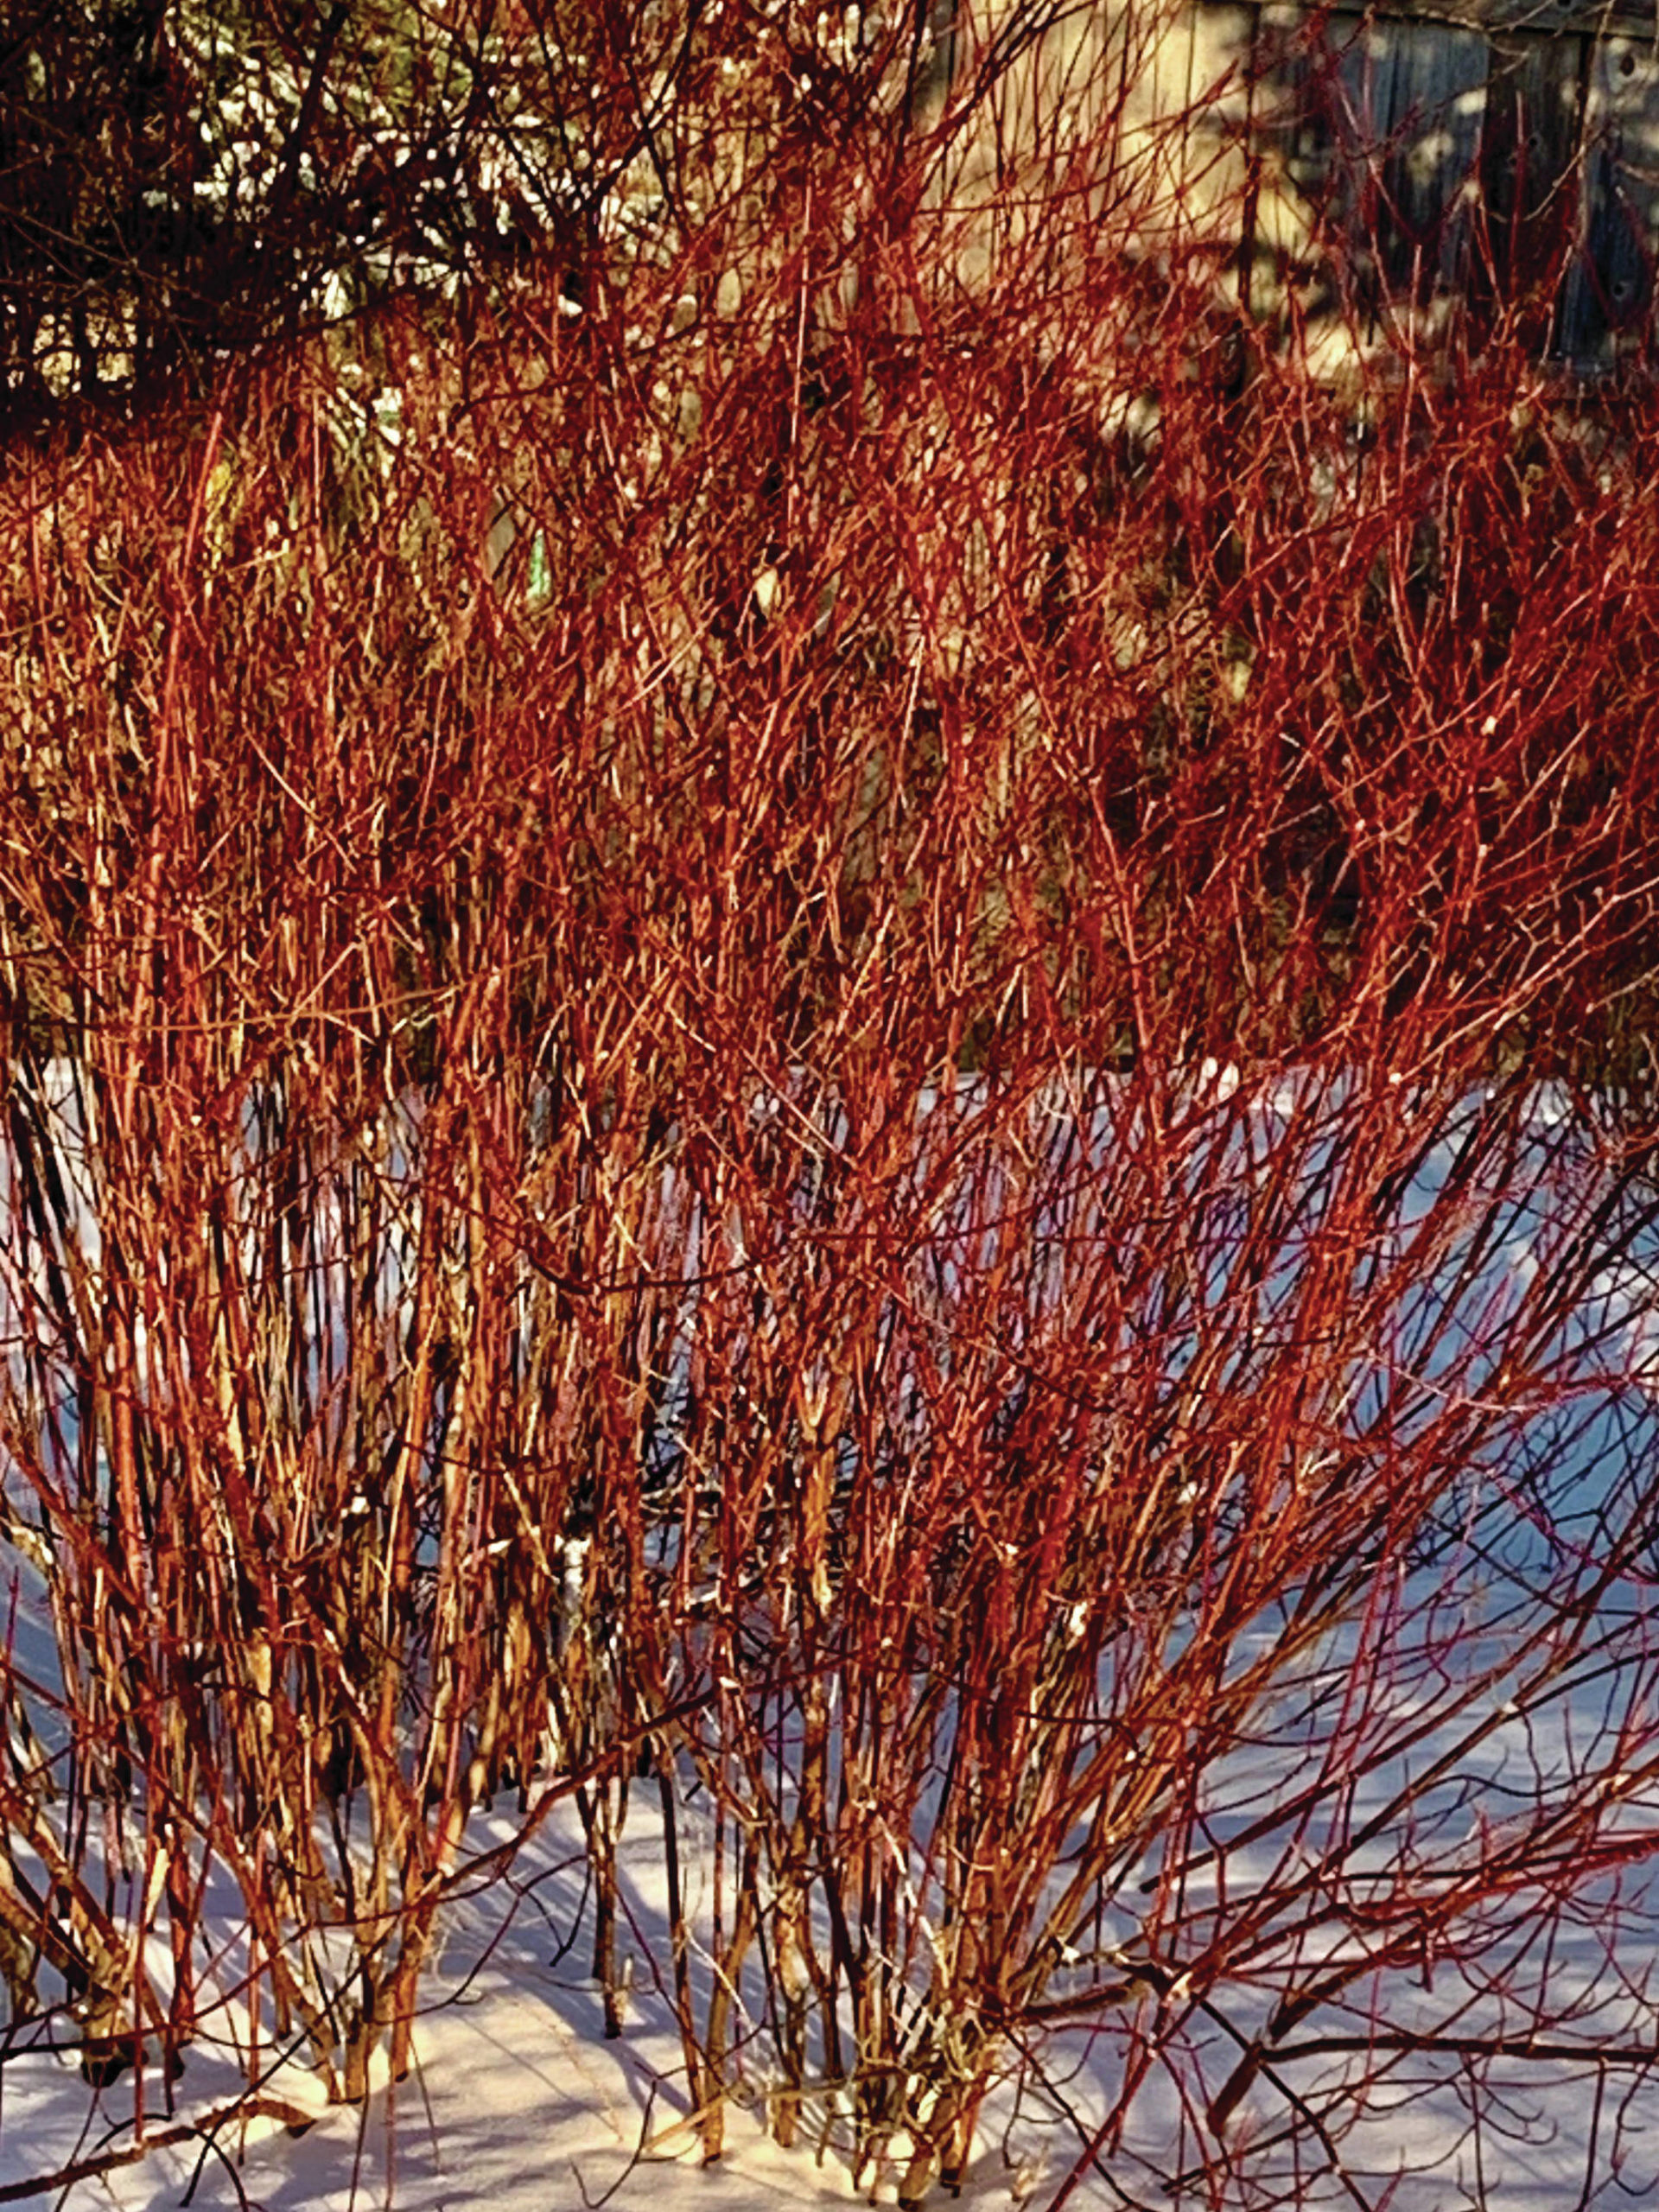 Red twig dogwood glows in low light on Friday, Feb. 15, 2020, in the Kachemak Gardener’s garden in Homer, Alaska. “Exactly the reason to have this shrub, to be appreciated in winter from the comfort of your home with a fire crackling in the wood stove,” writes Rosemary Fitzpatrick. (Photo by Rosemary Fitzpatrick)